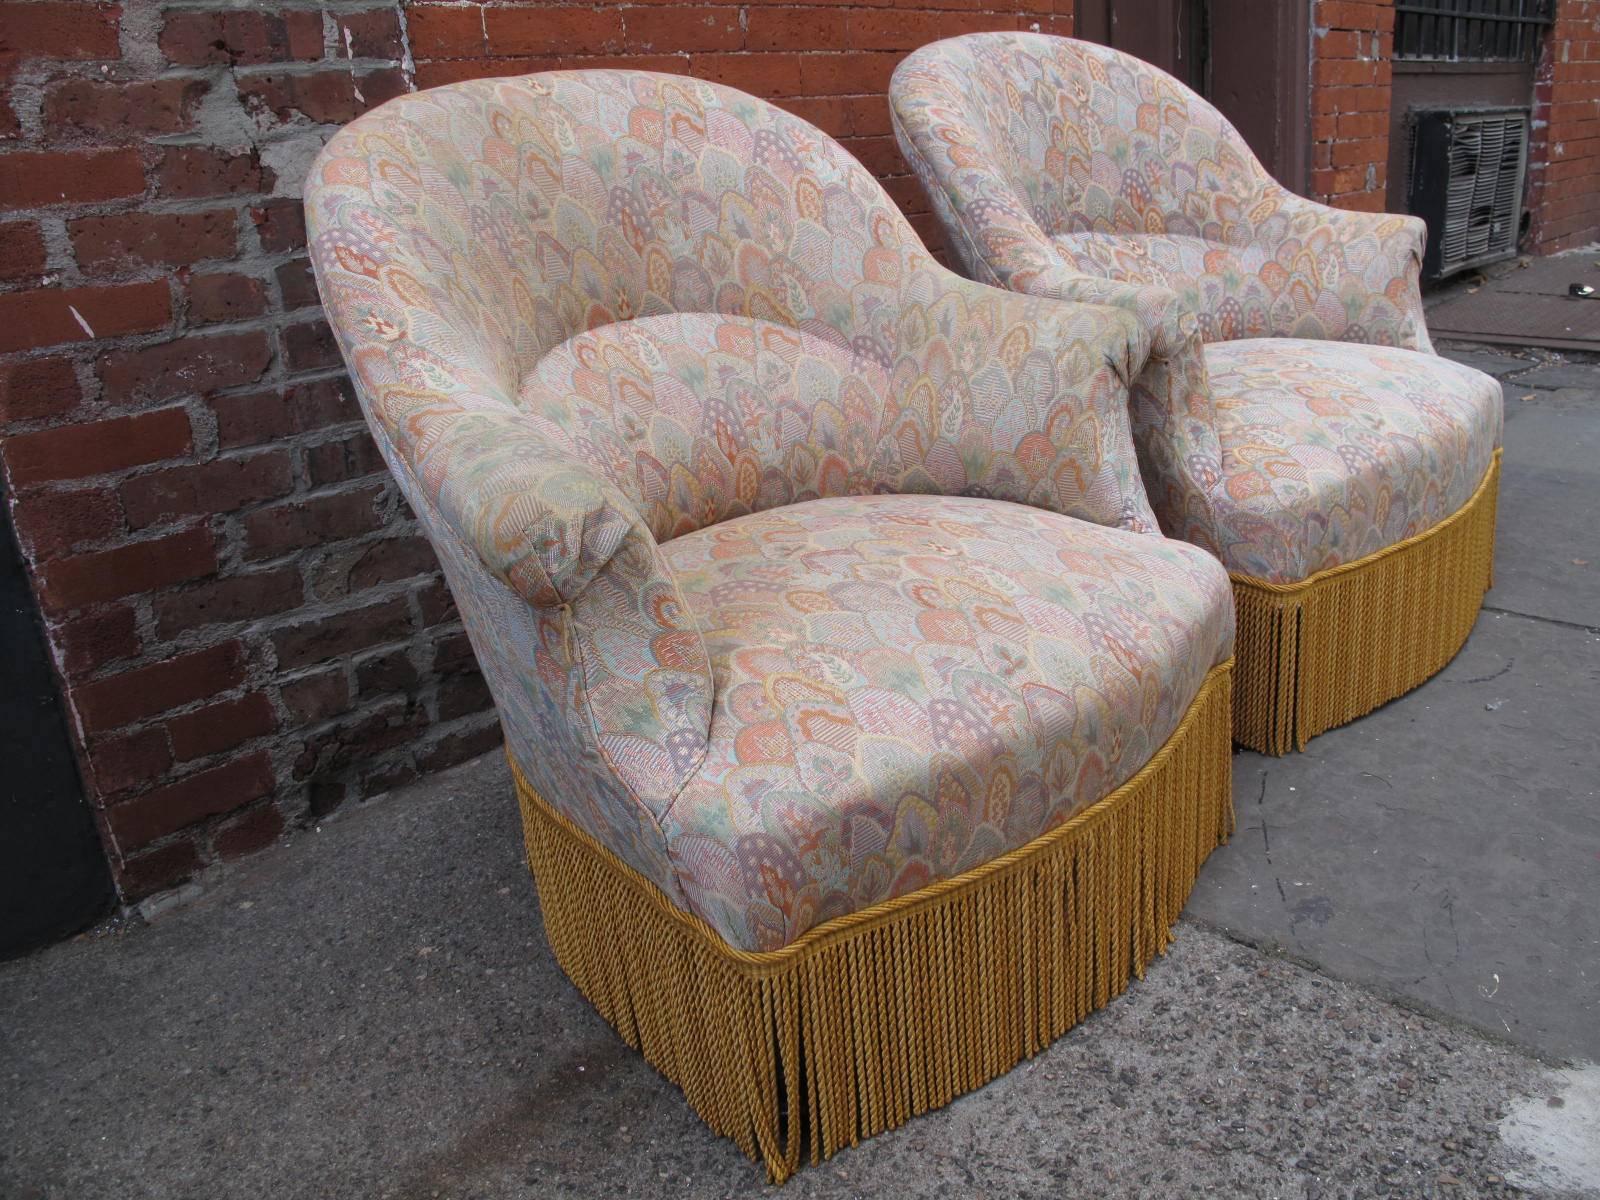 Two late 19th century French chairs. Ebonized legs under gold fringe. Pastel scallop upholstery, likely not original to chair frames. Available as a pair.